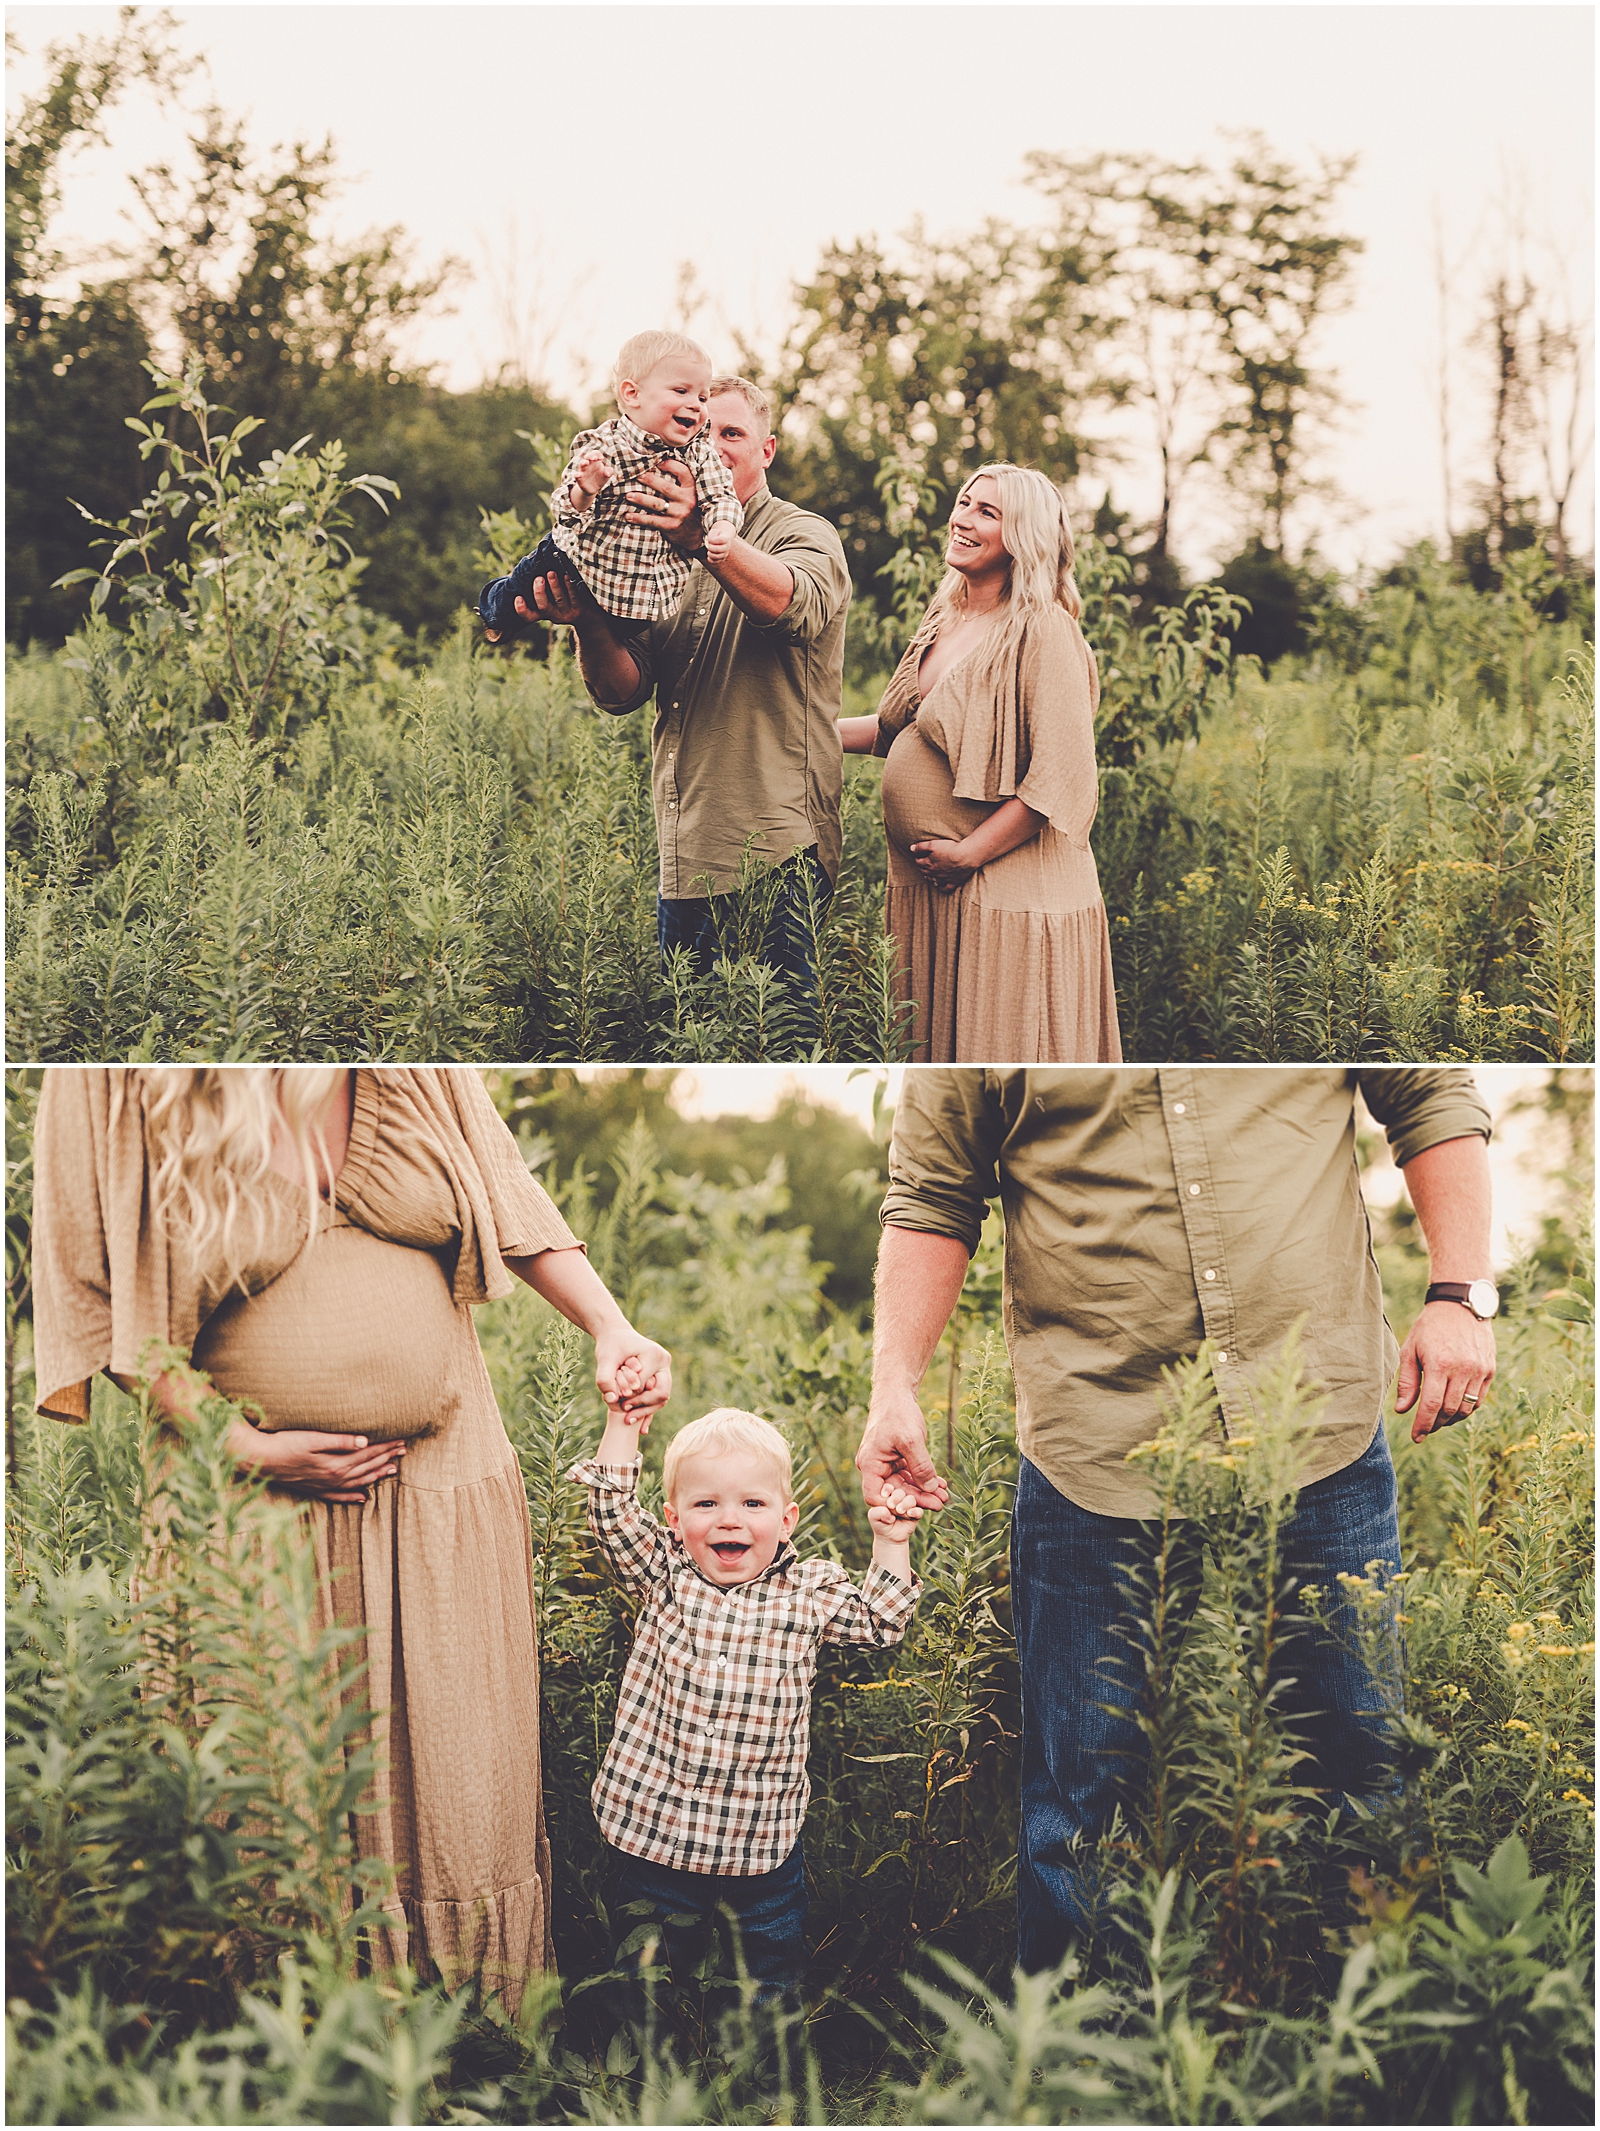 Hickory Creek family session in Mokena for the Metzger family with Kankakee County family photographer Kara Evans Photographer.